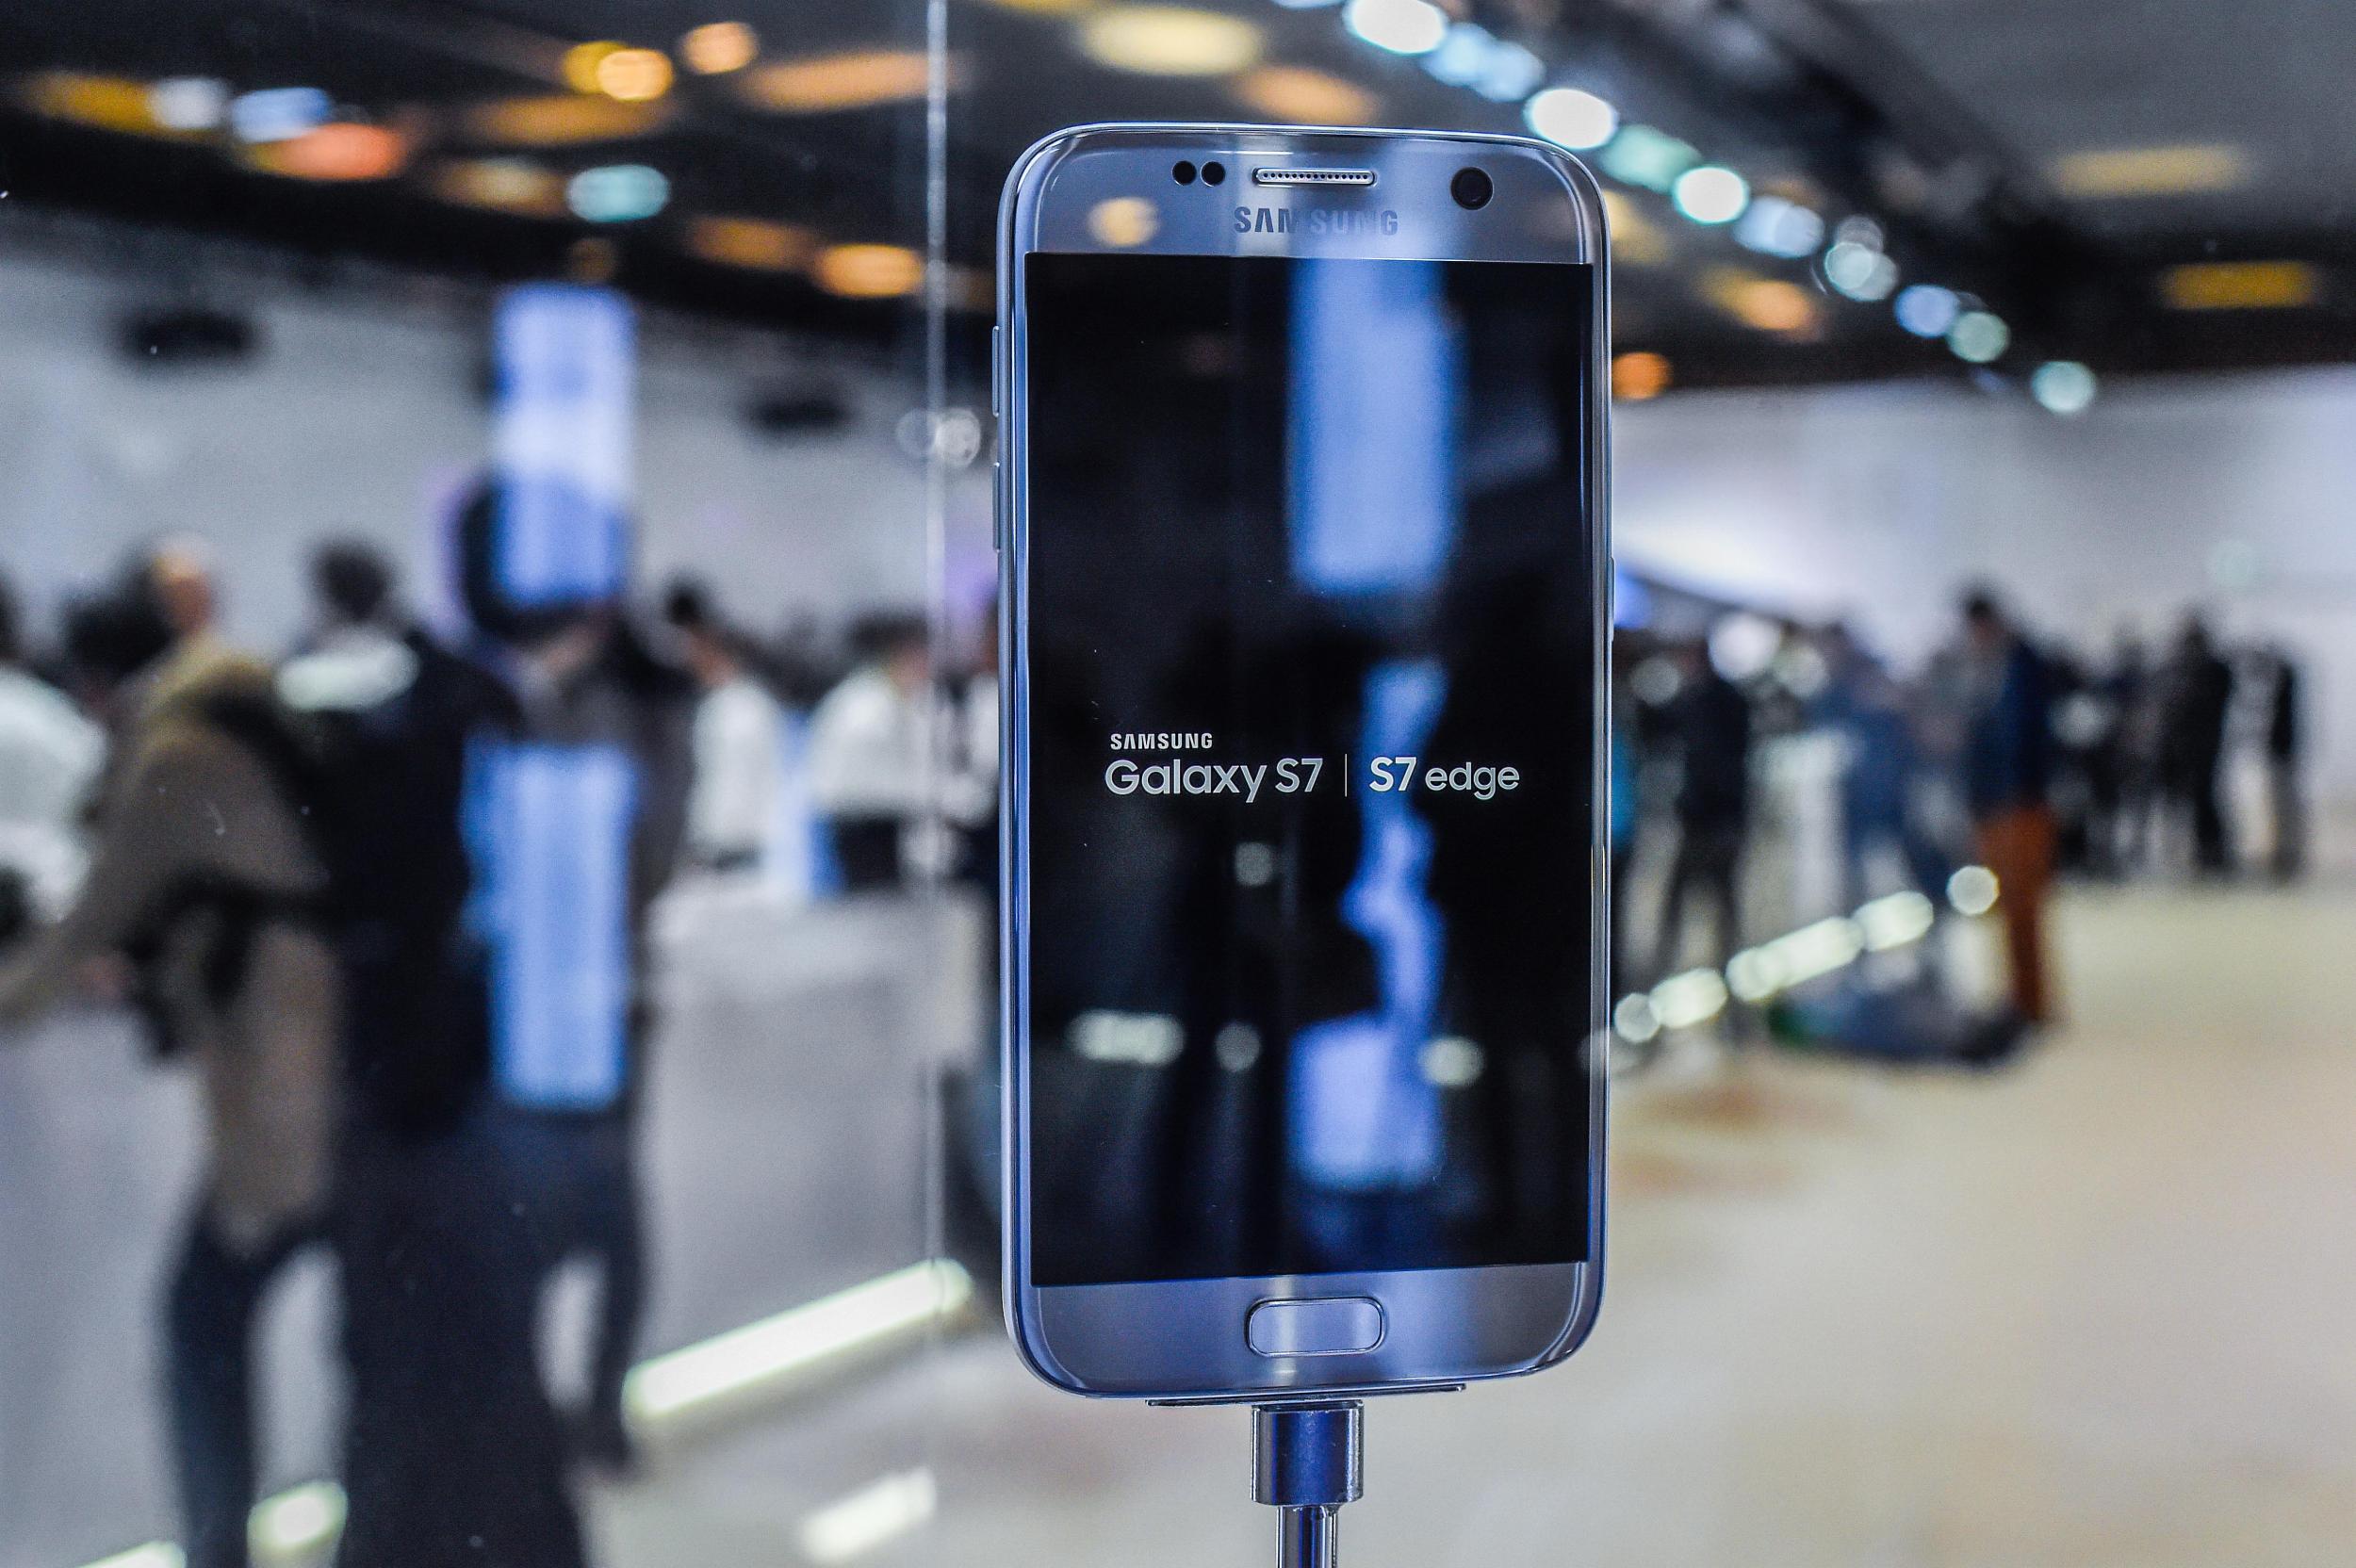 The Samsung Galaxy S7 at Mobile World Congress in Barcelona